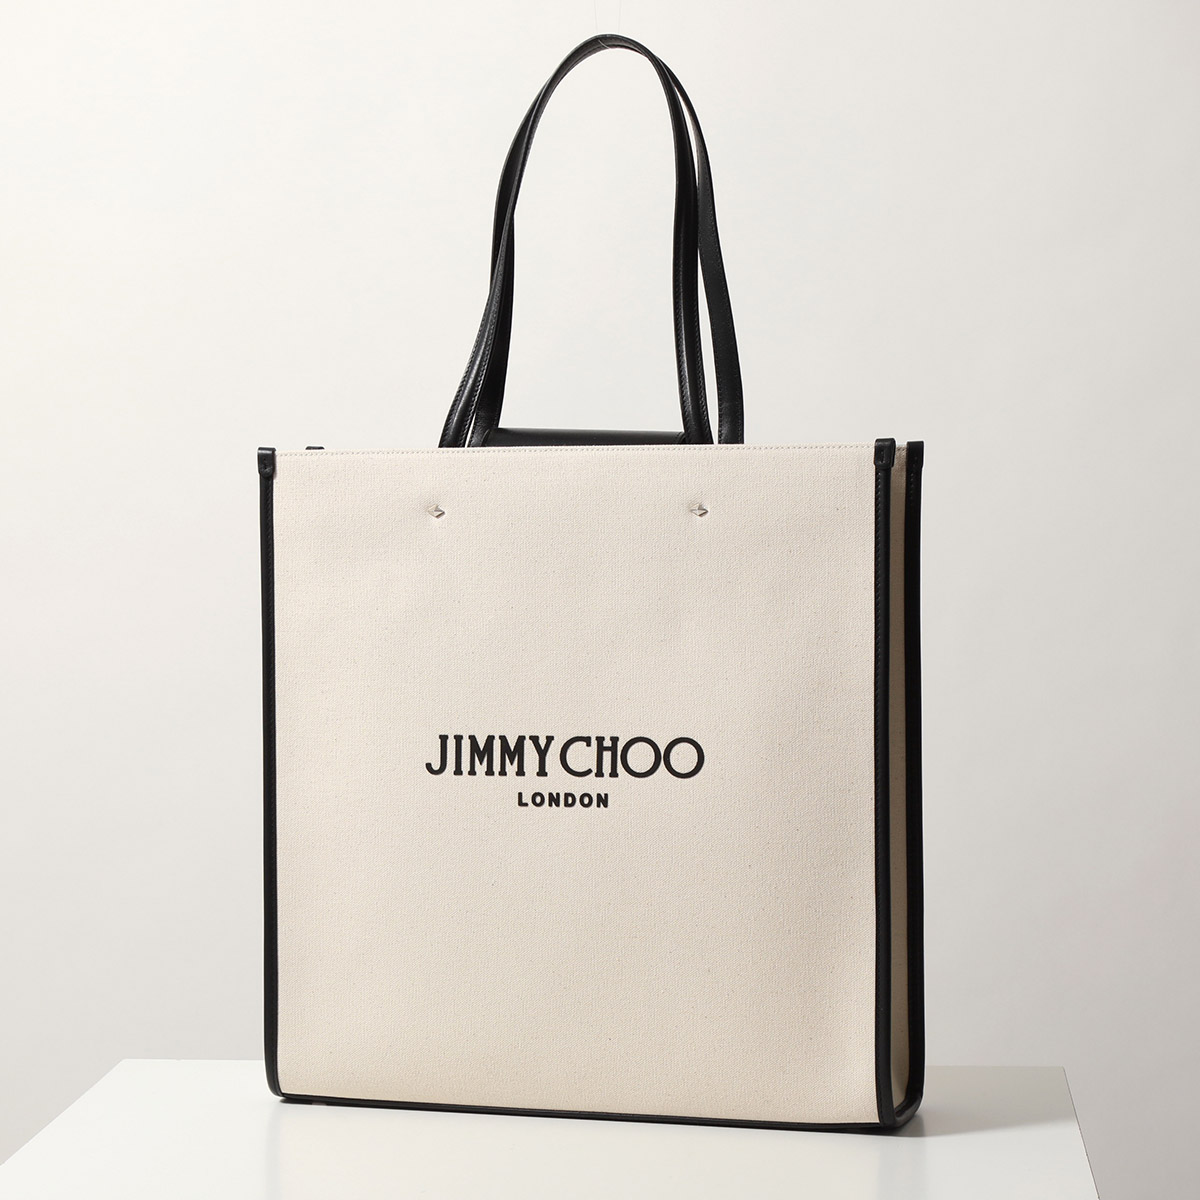 Jimmy Choo ジミーチュウ トートバッグ N/S TOTE/L CZM メンズ キャンバス×レザー ロゴ 鞄 NATURAL/BLACK/SILVER｜s-musee｜02